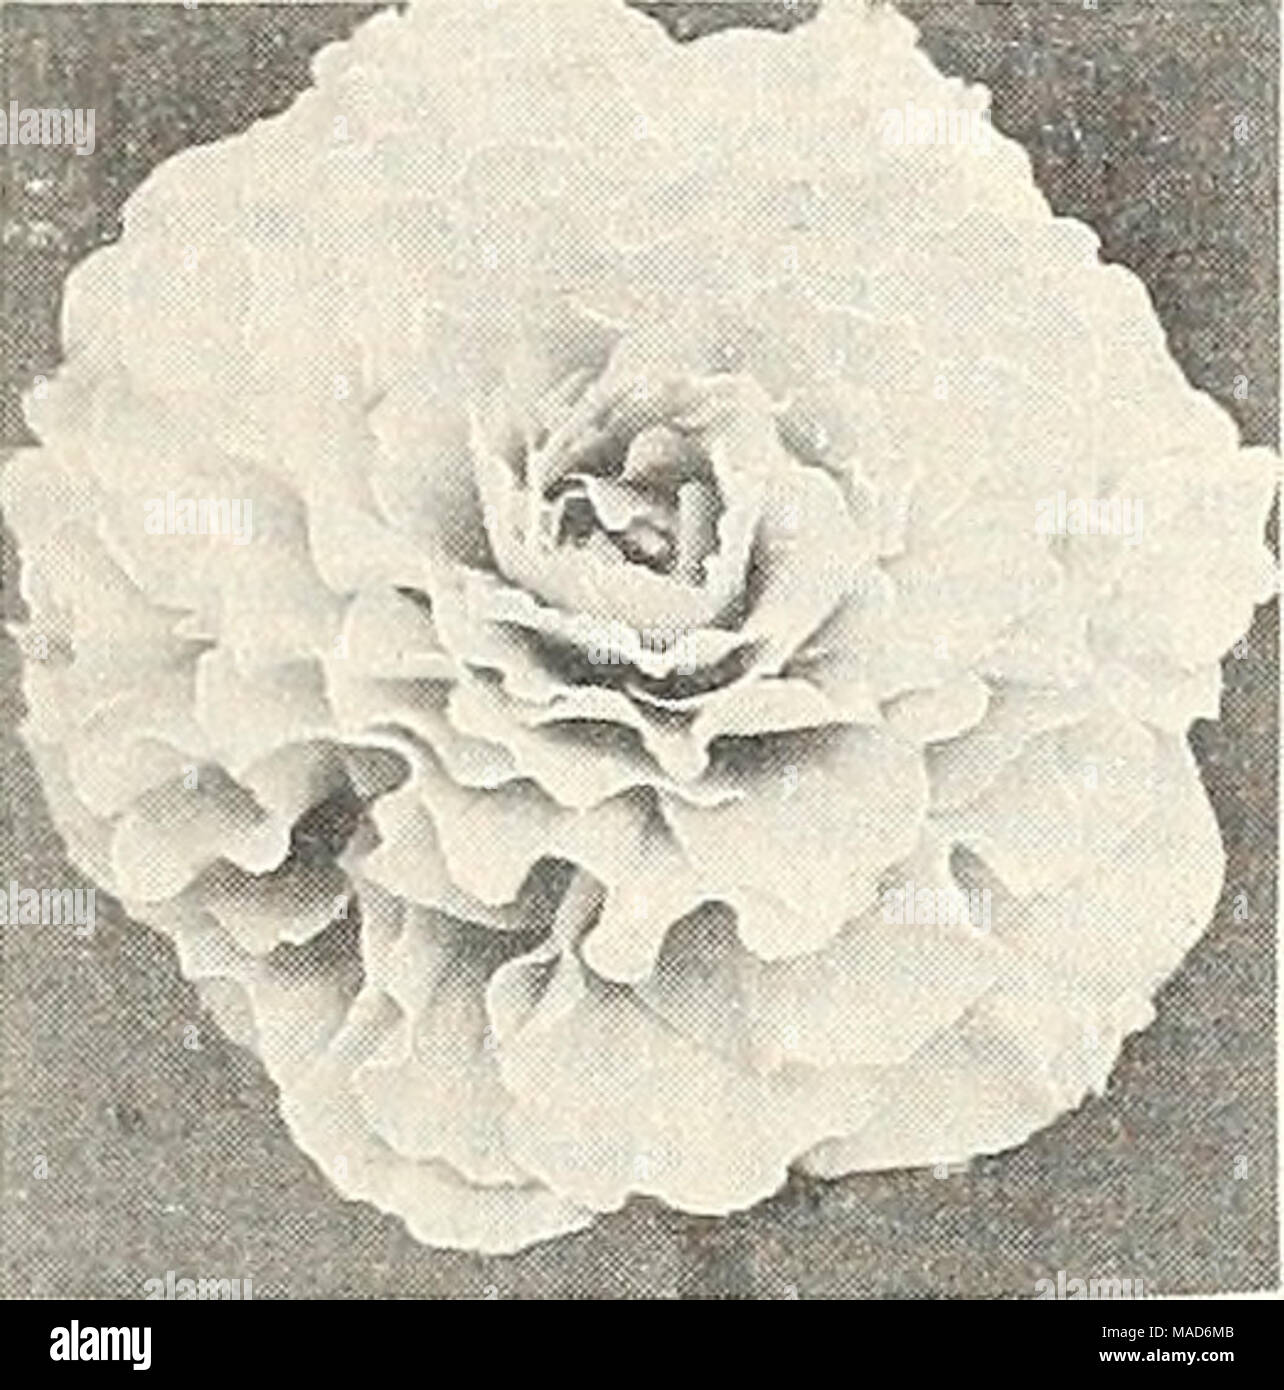 . Dreer's a real old fashioned quality garden book for 1952 : to make your garden more beautiful more productive more enjoyable . Double Frilled Begonia Double Frilled Also called Carnation-flov/- ered. Large, double frilled blooms borne on sturdy compact plants. BB5IC Crimson-Rose BB52C Pink BB53C Scarlet BB54C Orange BB55C Yellow BB56C Salmon BB57C White BB58C Apricot BB59C Mixed CameUia-Flowered Superb large double flowers with plain petals just like choice Camellias. BBUC Red BB13C Scarlet BB16C Salmon BB19C Copper BB21C Pink BB24C Orange BB2SC Yellow BB27C White BB29C Mixed Avy of the abo Stock Photo